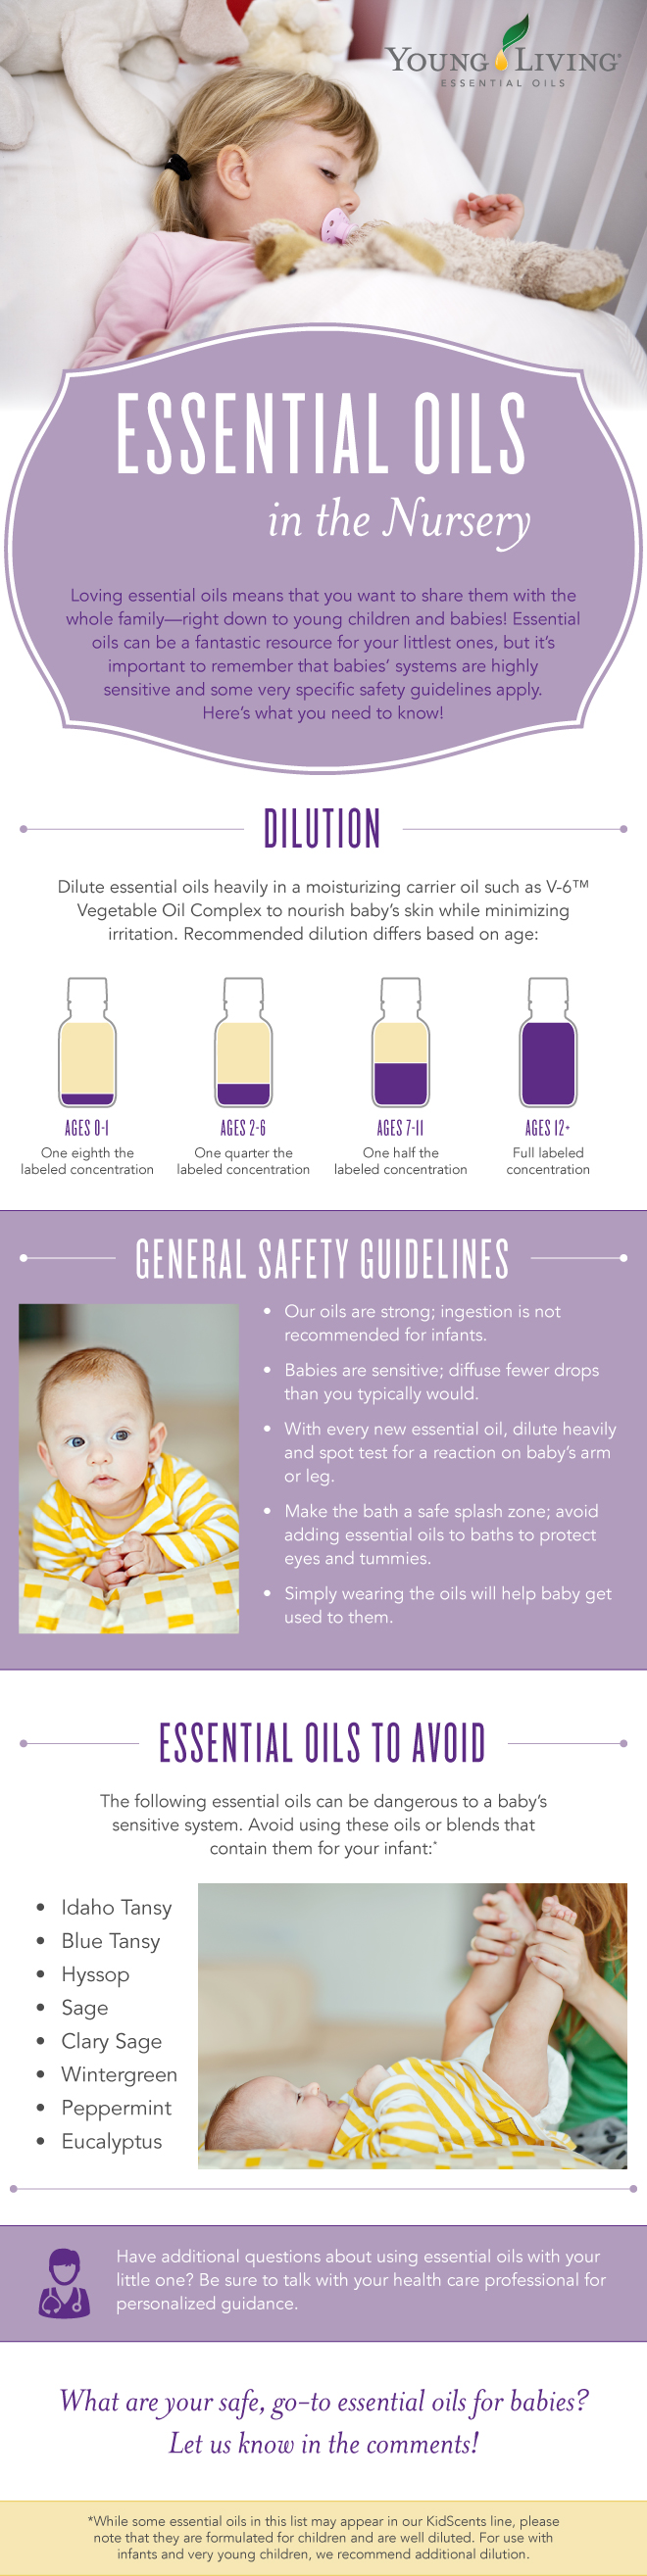 Young Living - Babies and Essential Oils